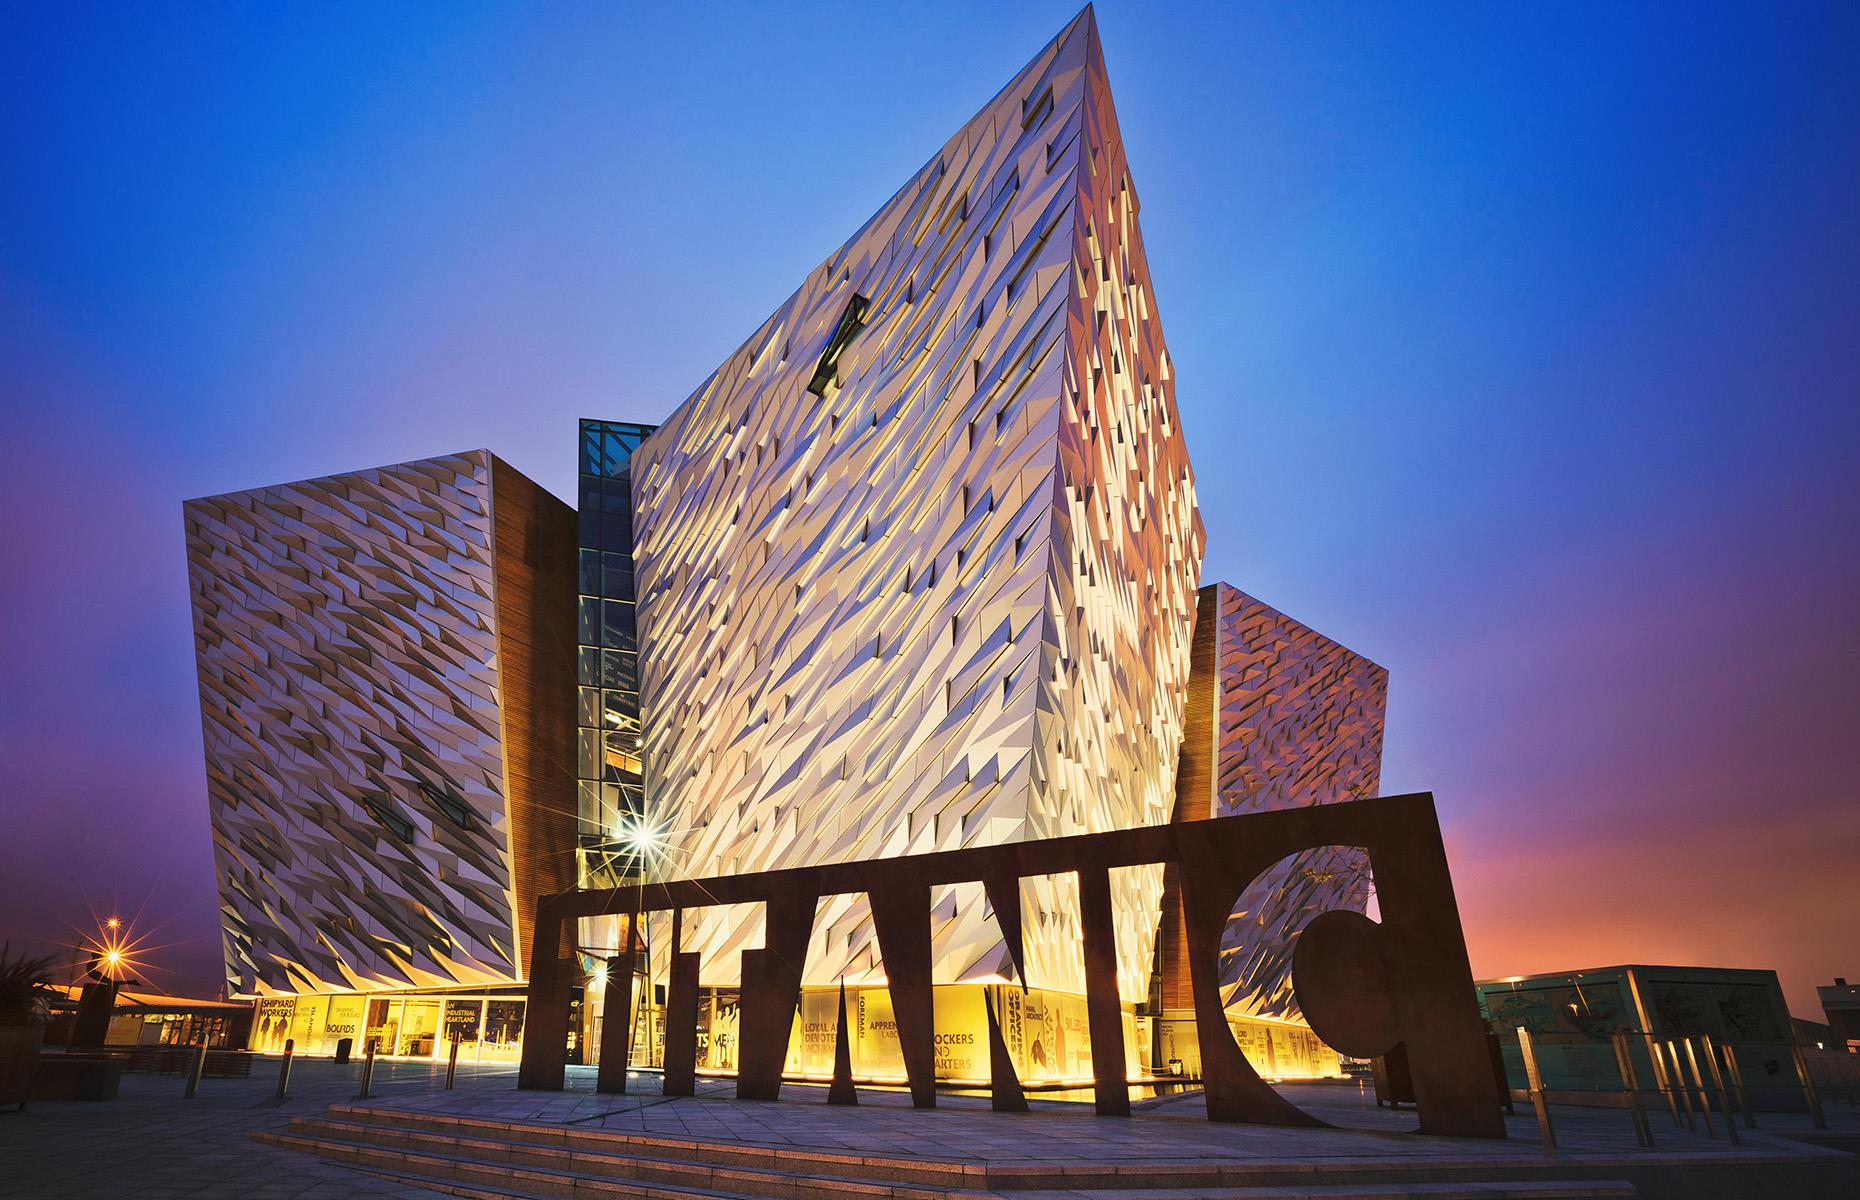 <p>Located on the very spot where the ill-fated ship was designed, built and launched, <a href="https://www.titanicbelfast.com/explore/">Titanic Belfast</a> is a world-leading tourist attraction which takes visitors on an immersive journey from the bustling boomtown of early 19<sup>th </sup>century Belfast, through the conception and construction of the RMS Titanic. You'll also learn what life was like on board the completed ship and within the cabins of various classes, and finally the story culminates in the tragic sinking and devastating aftermath, with one of the largest collections of salvaged artefacts in the world.</p>